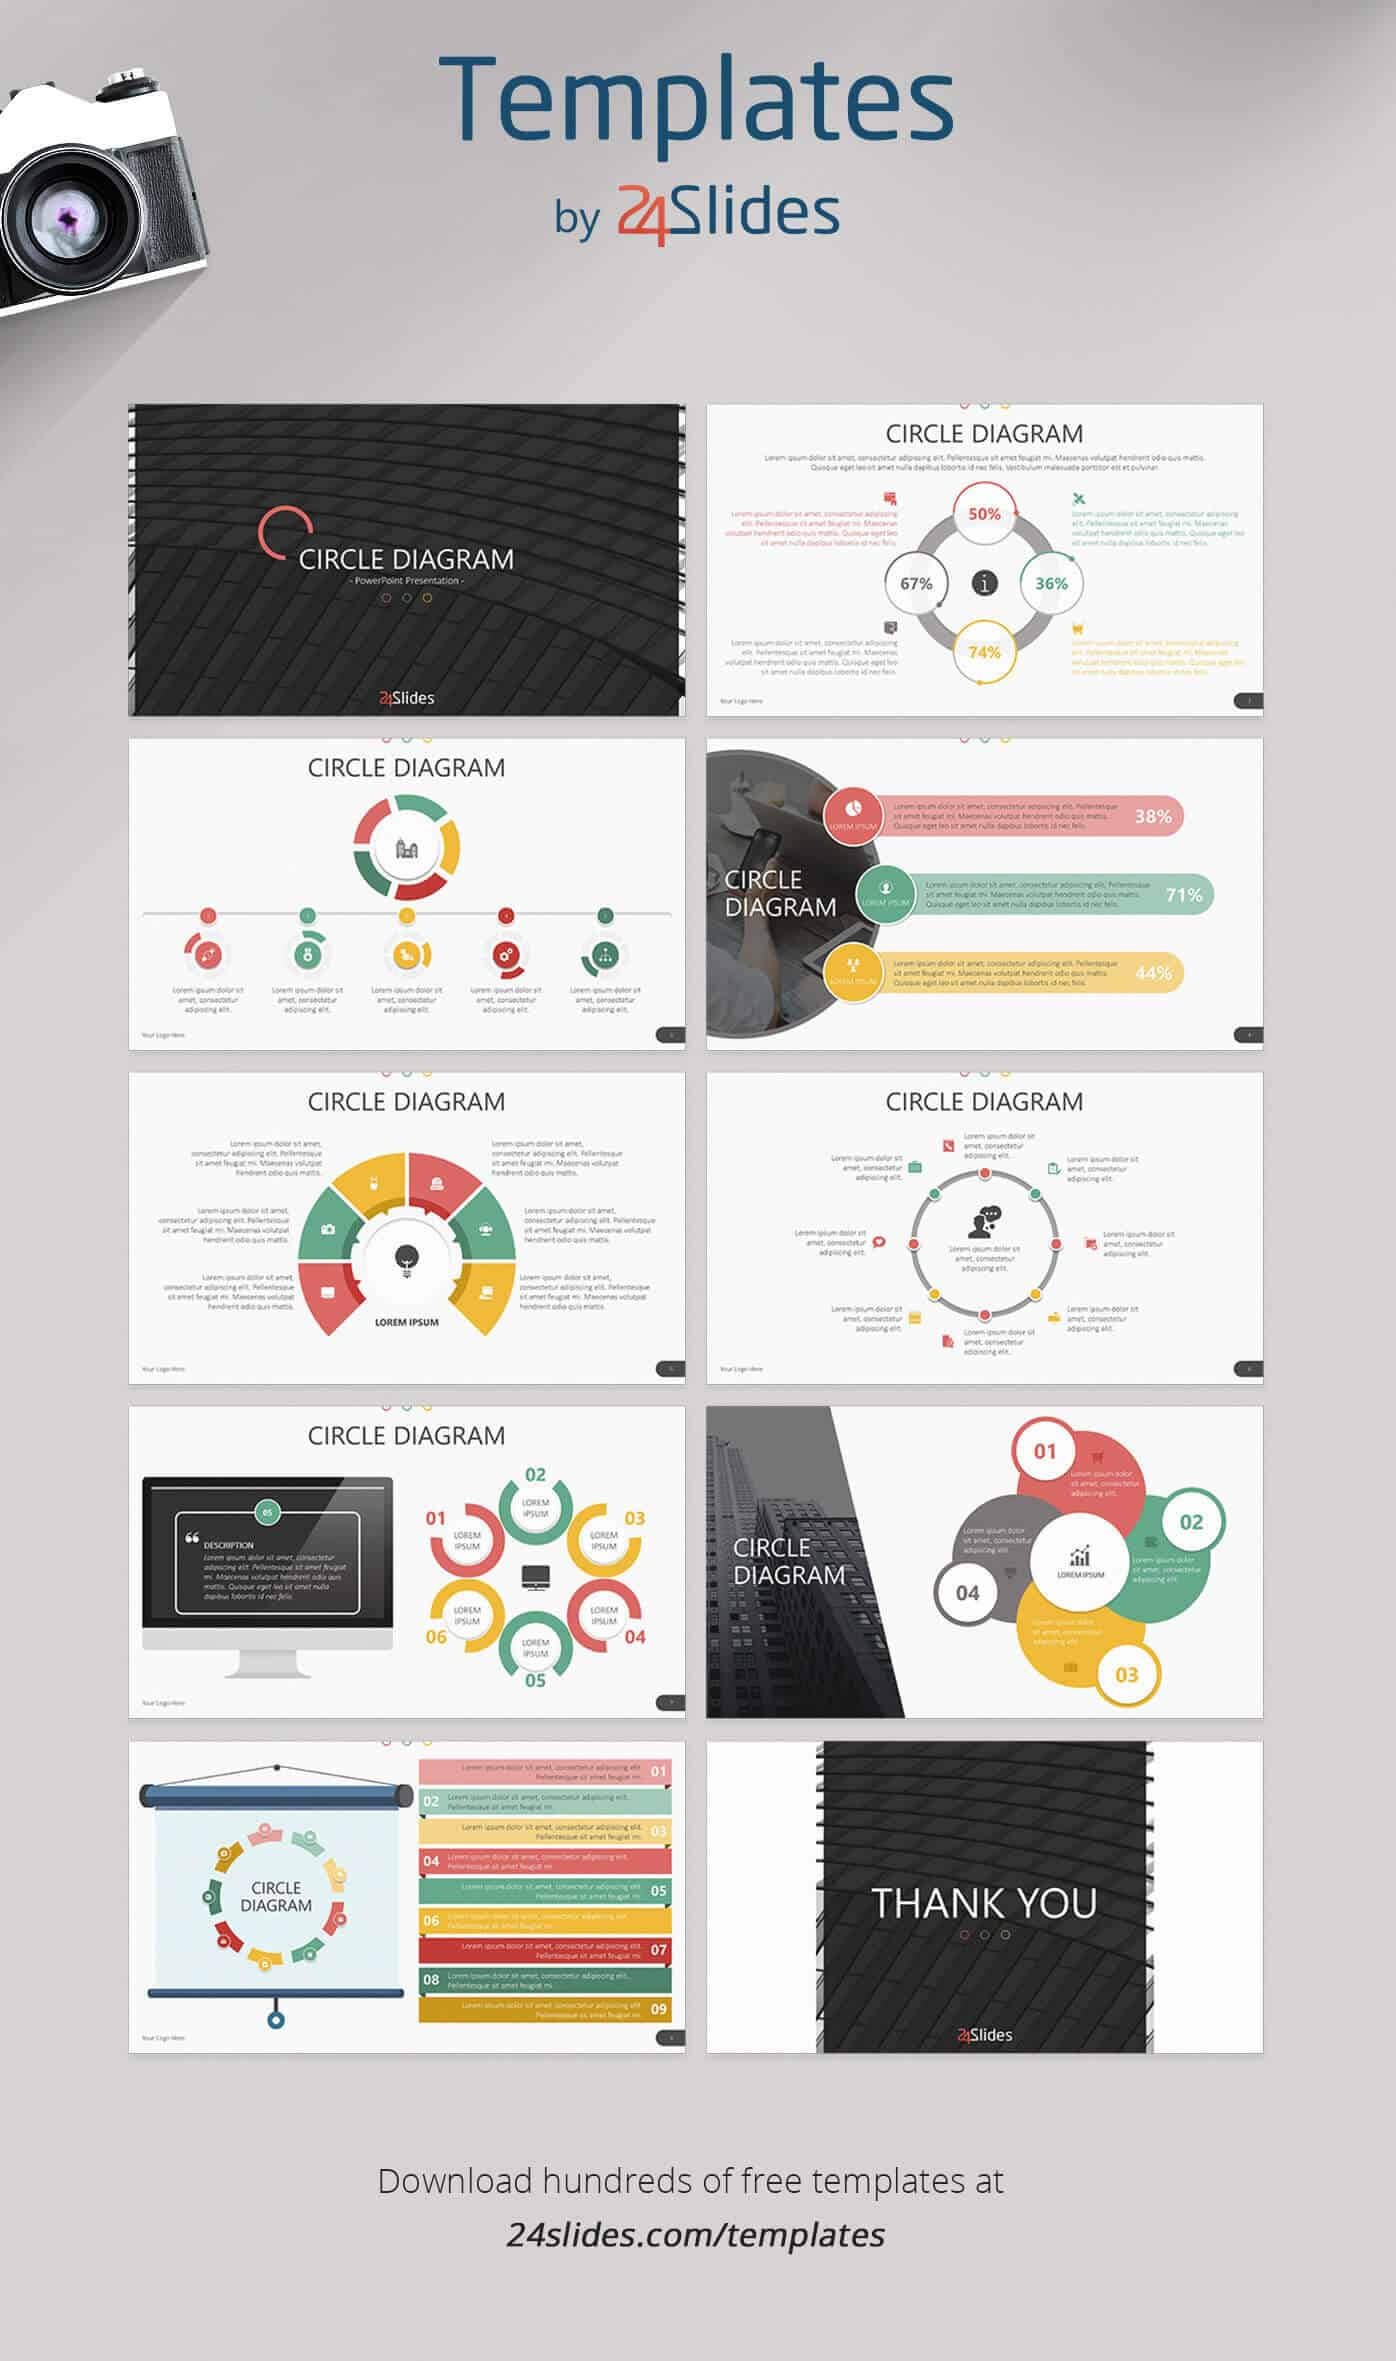 15 Fun And Colorful Free Powerpoint Templates | Present Better Pertaining To Powerpoint Slides Design Templates For Free